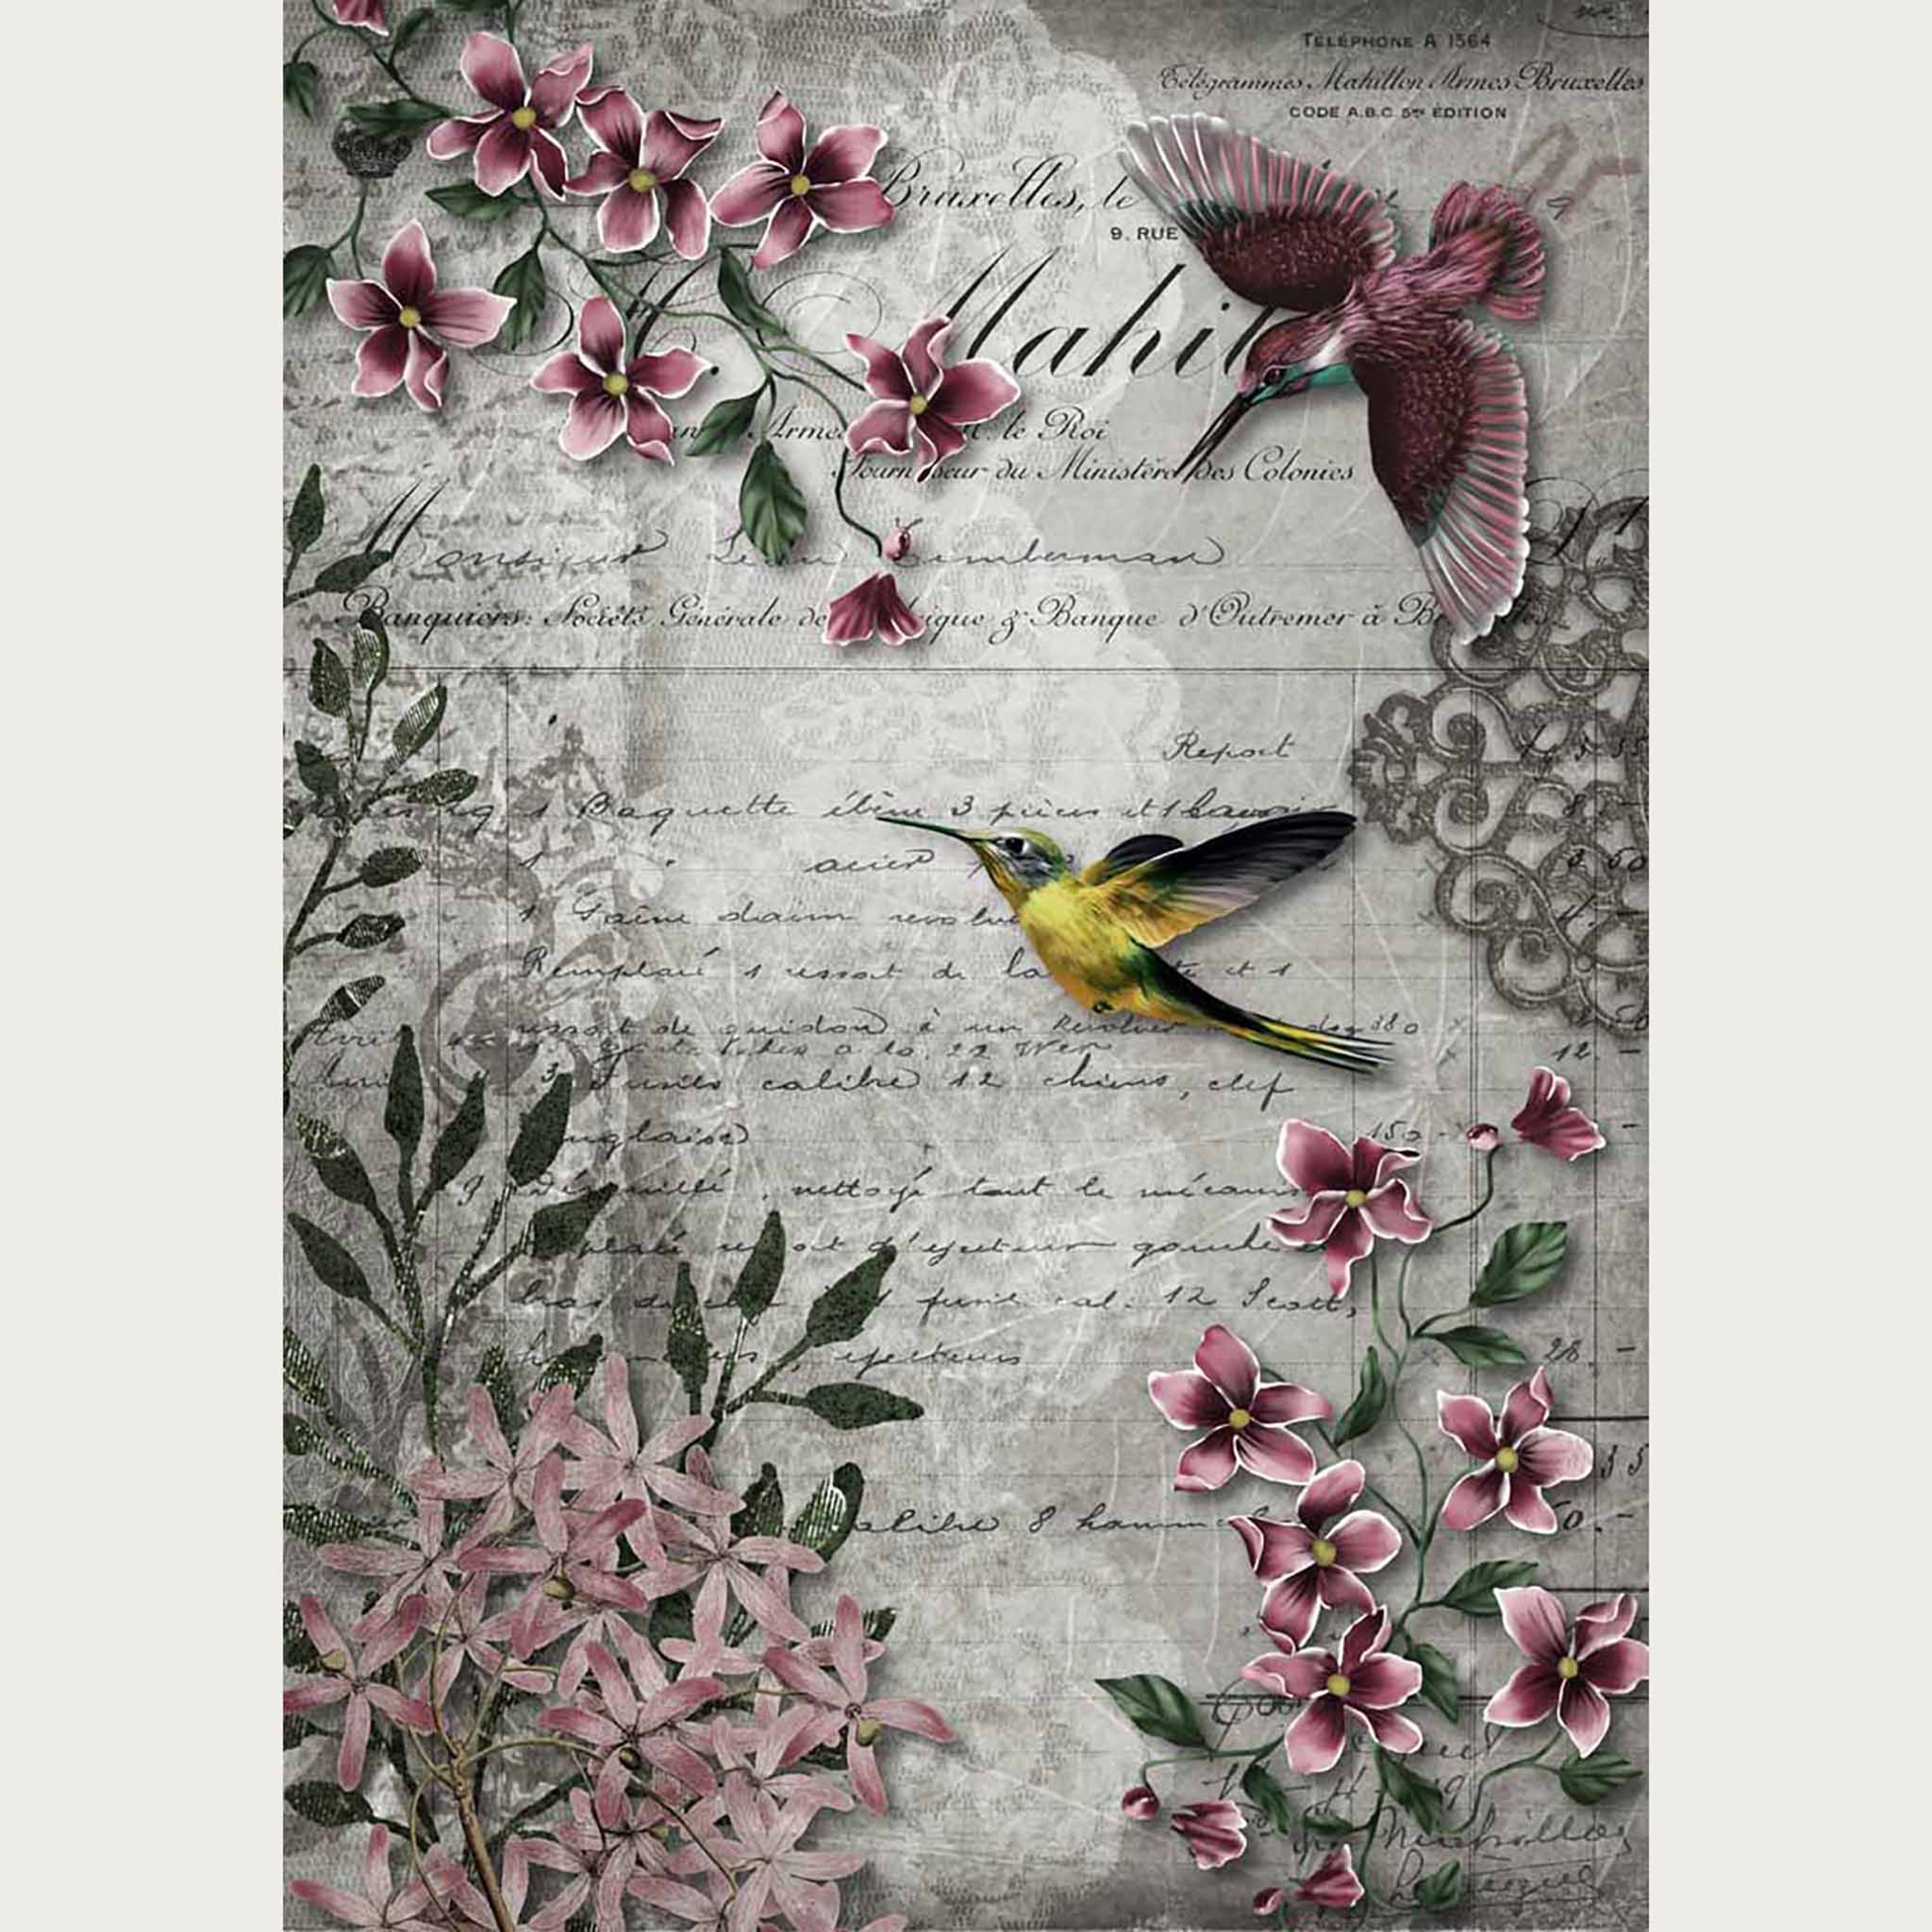 A4 rice paper design featuring a beautiful combination of hummingbirds, flowers, and scrollwork against a light gray script letter. White borders are on the sides.